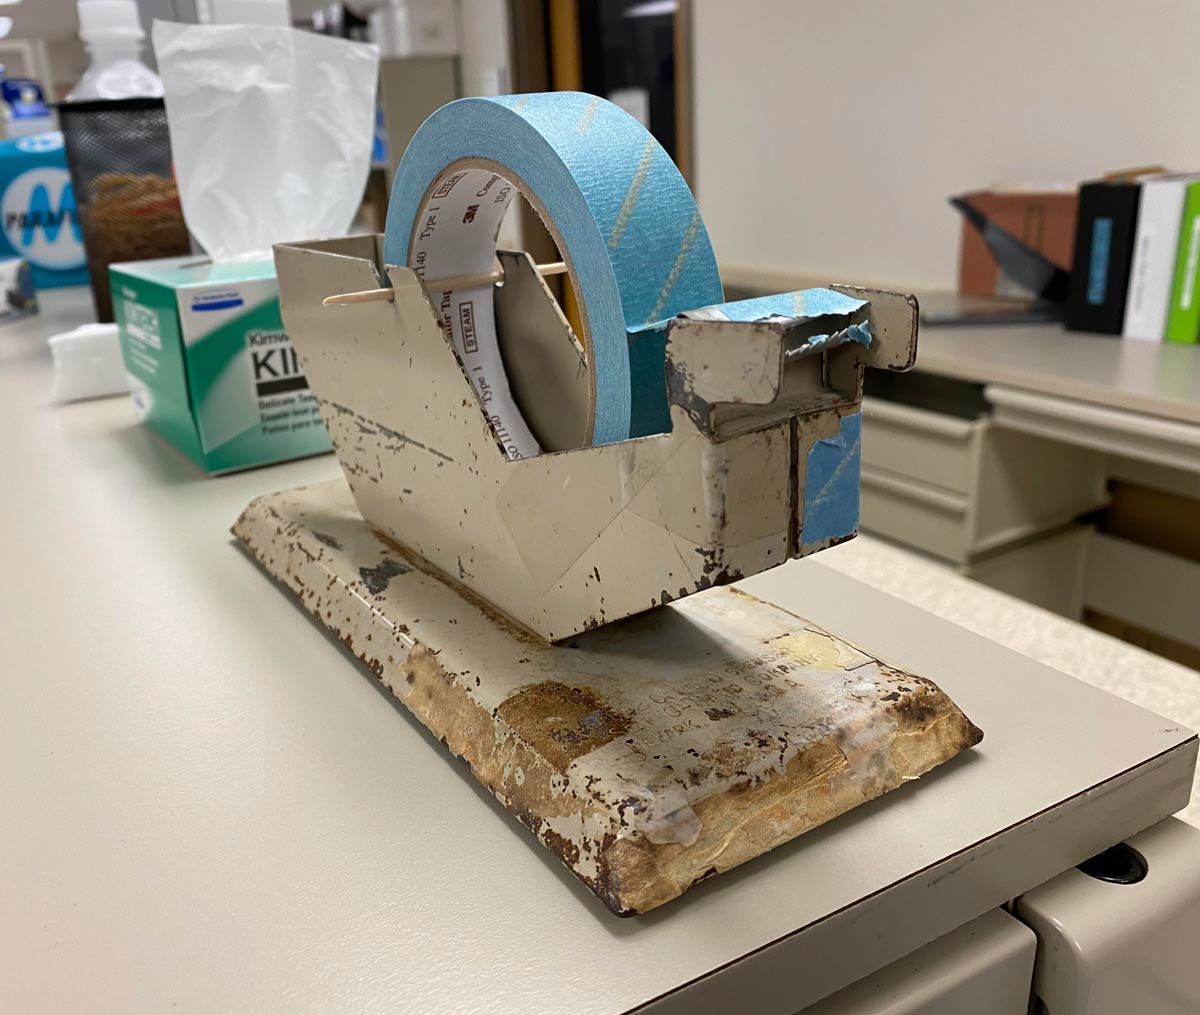 This multi-million dollar hospital lab I work in, with huge analyzers and new equipment manufactured months ago has a tape dispenser from 1960's, held up by a toothpick